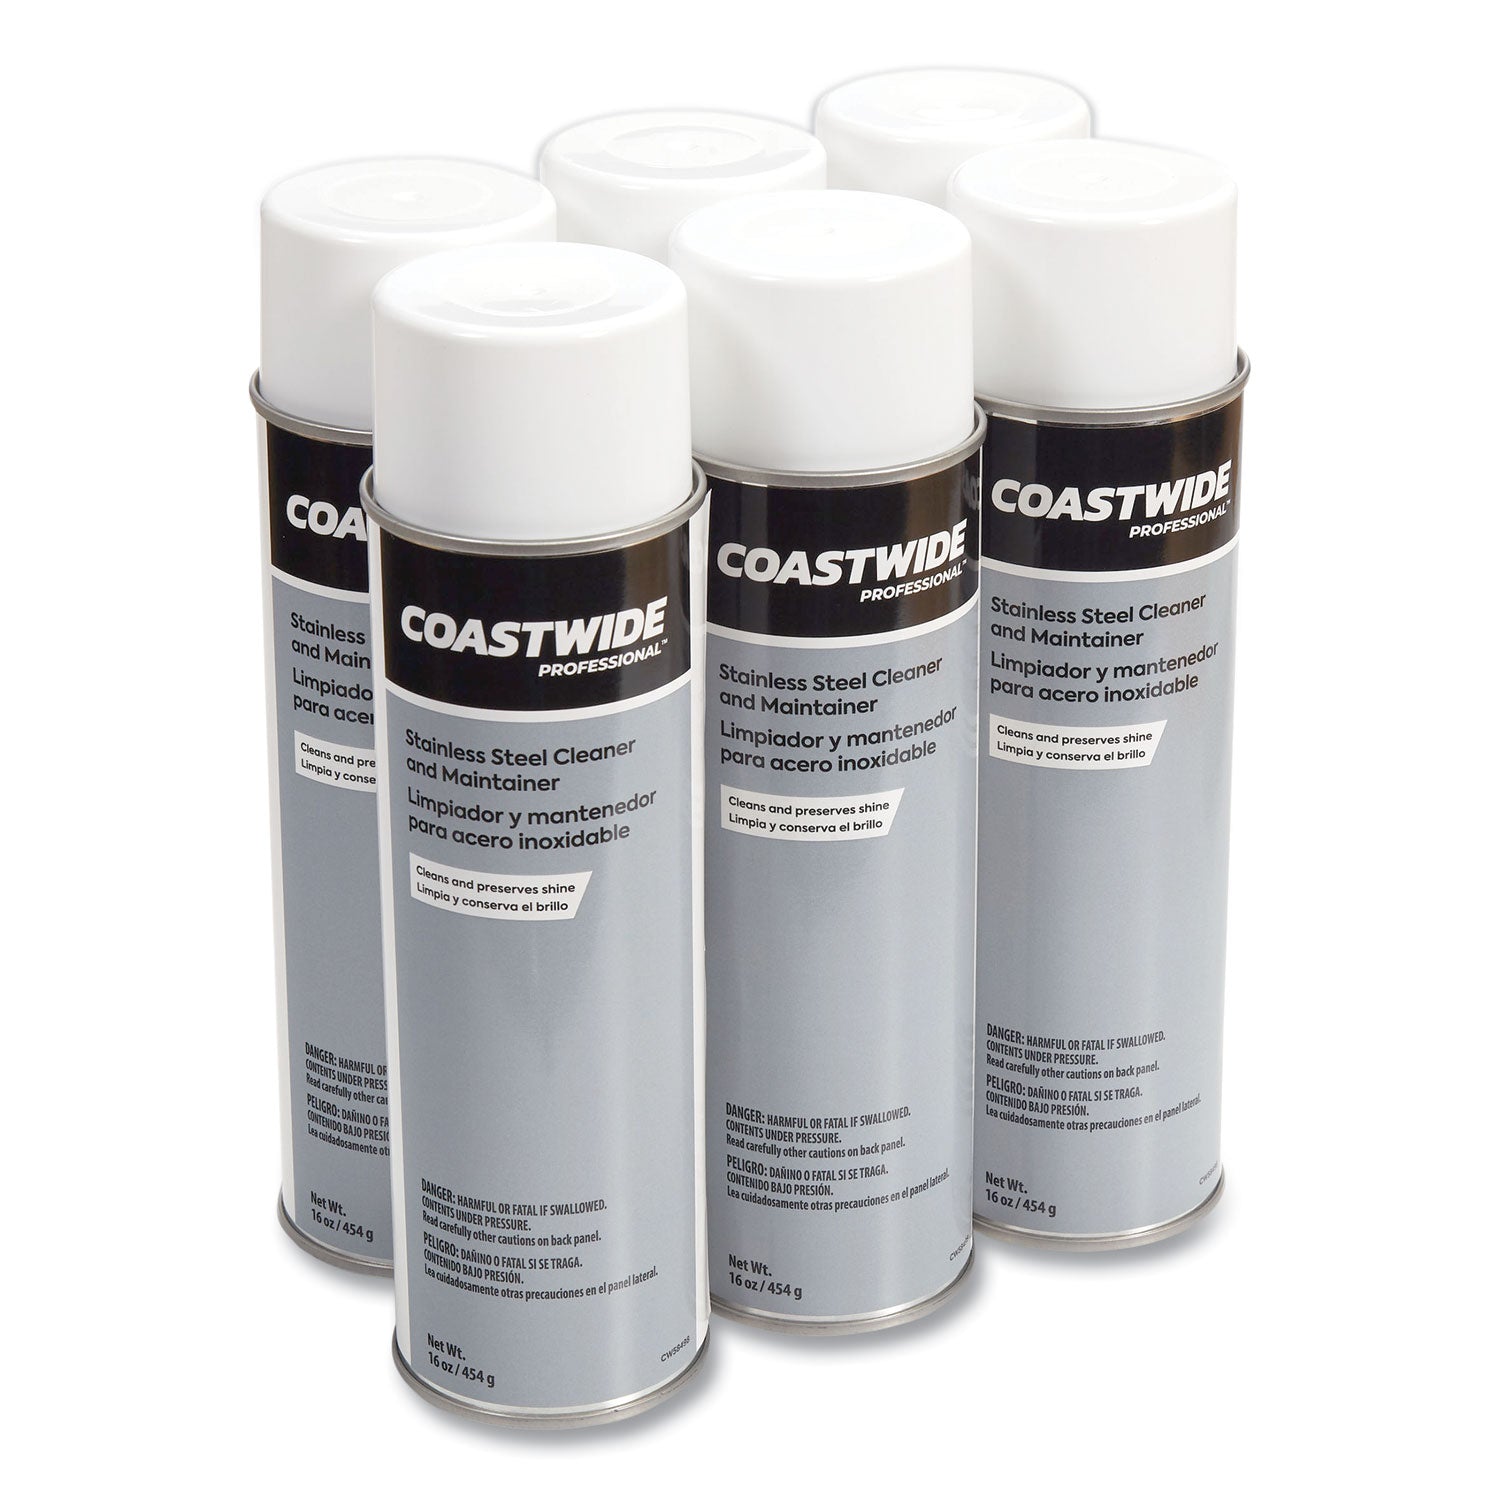 Coastwide Professional„ Stainless Steel Cleaner and Maintainer, Fresh and Clean, 16 oz Aerosol Spray, 6/Carton